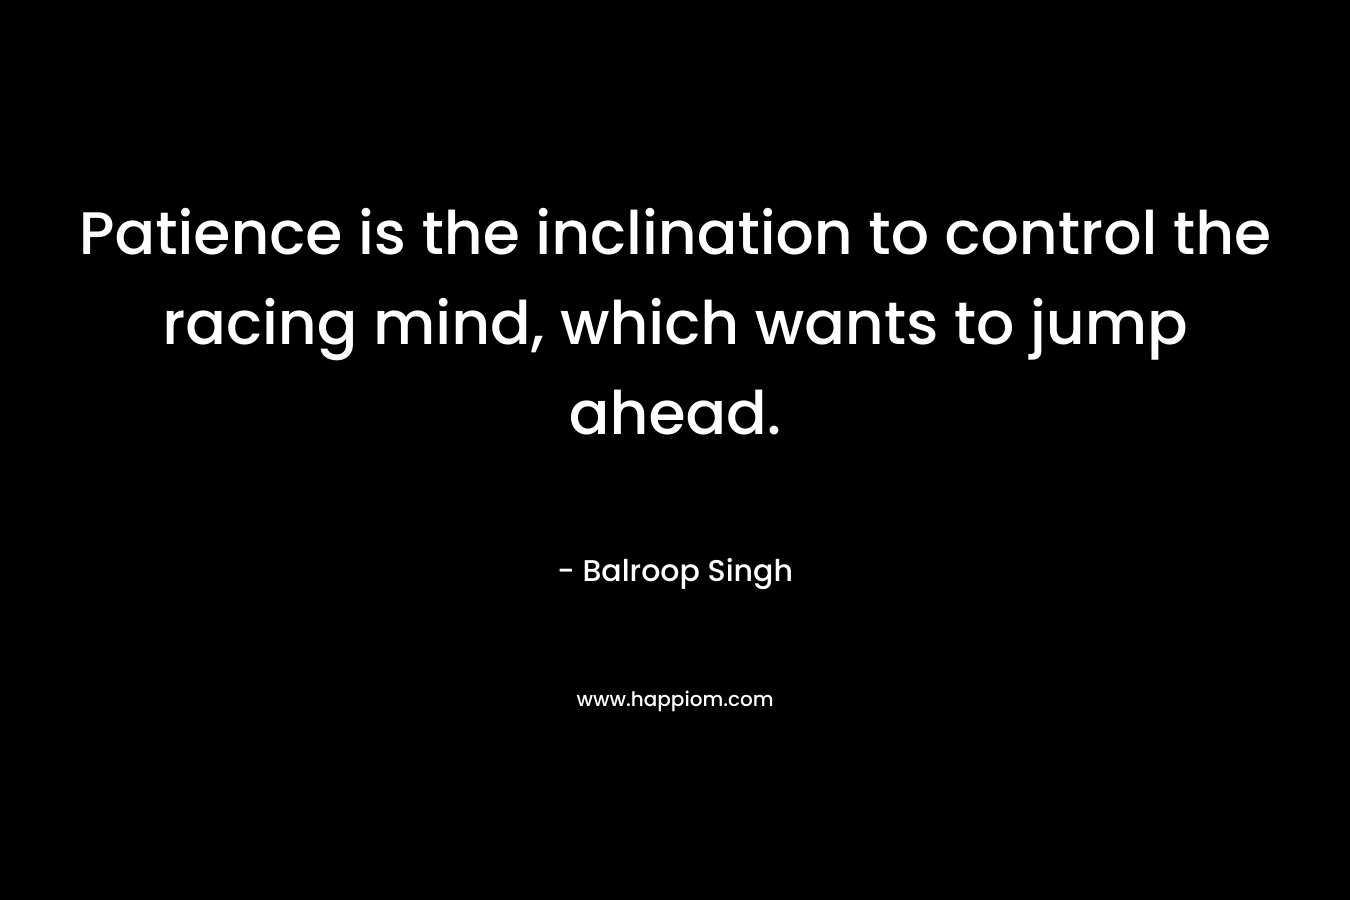 Patience is the inclination to control the racing mind, which wants to jump ahead. – Balroop Singh